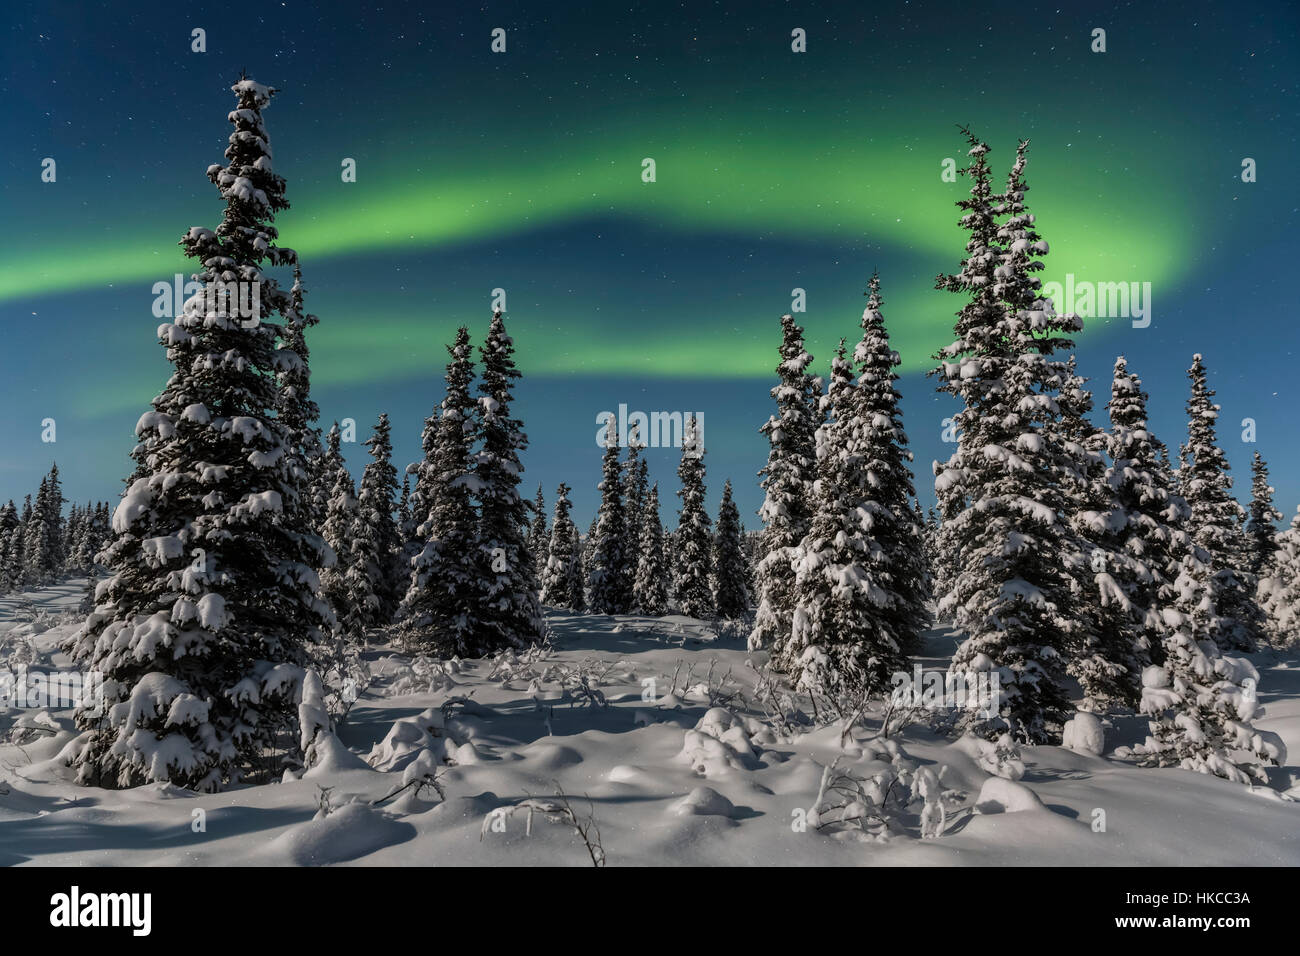 Green Aurora Borealis dances over the tops of snow covered black spruce trees, moonlight casting shadows on a clear winter night, interior Alaska Stock Photo